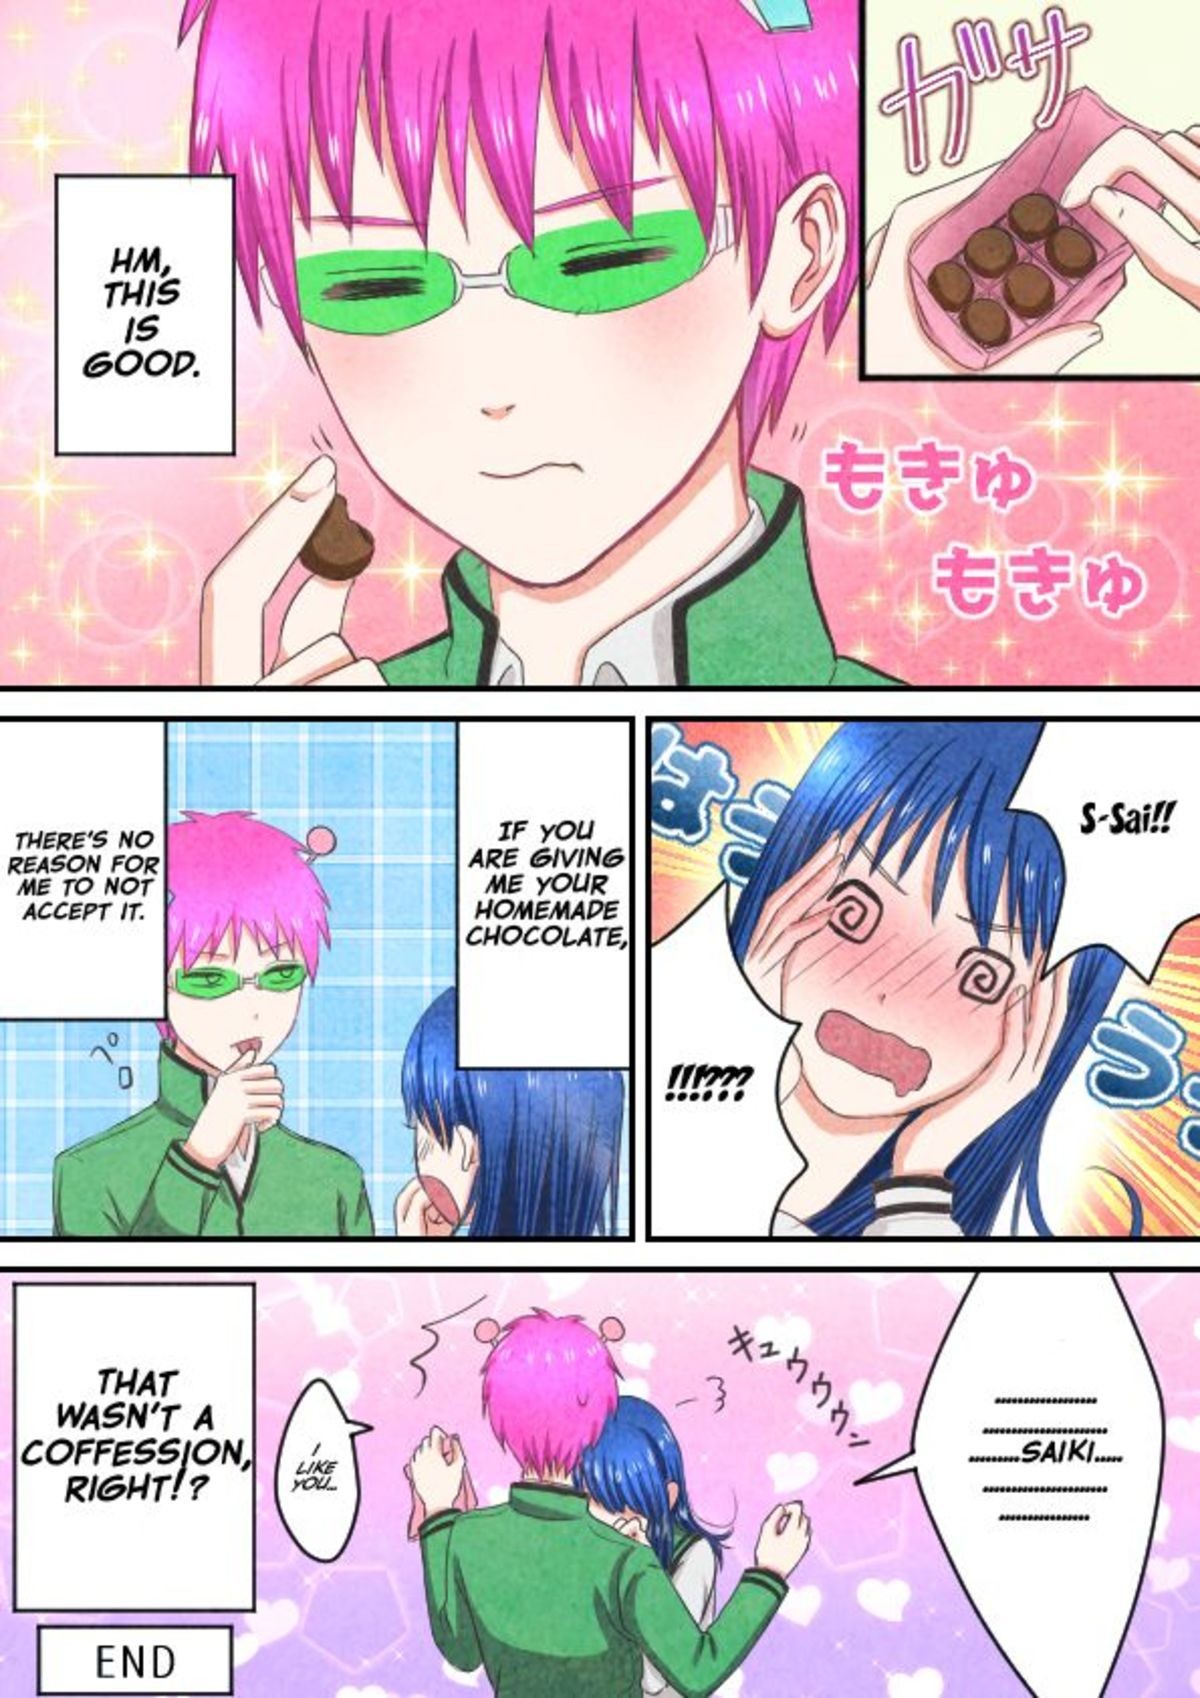 The disastrous life of saiki k for anyone who wants to know. 